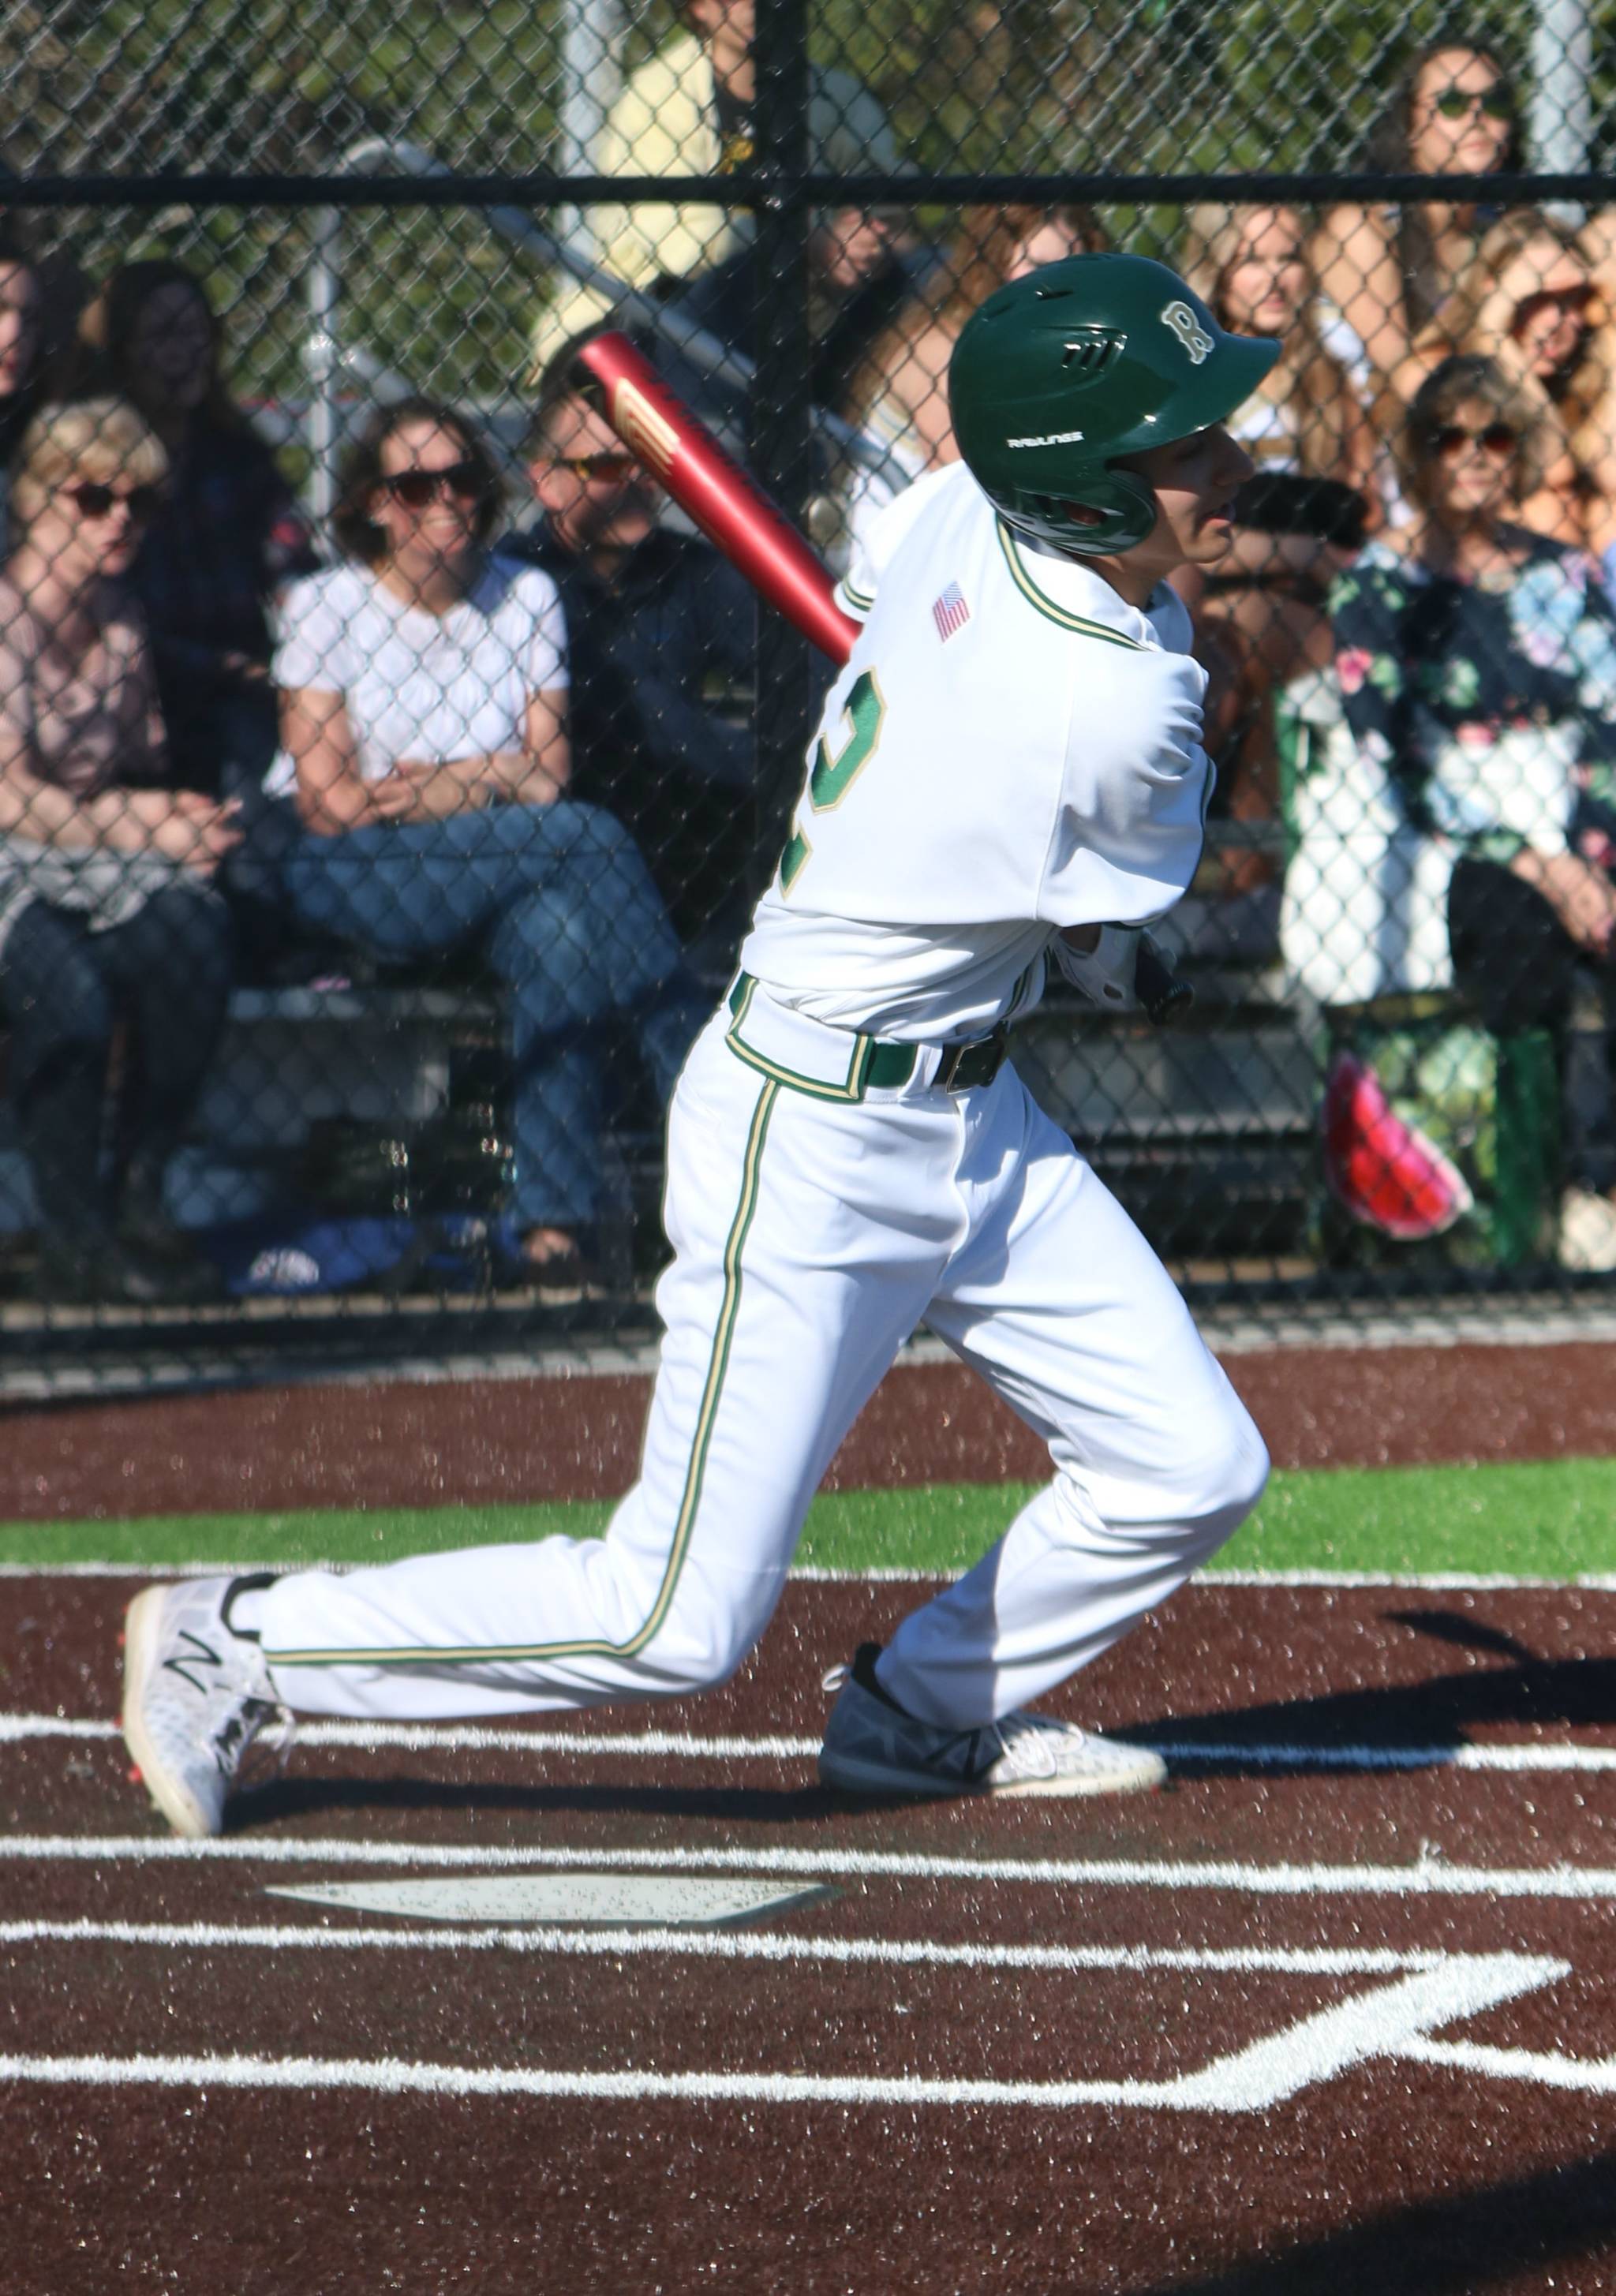 Redmond High’s Darek Khabani connects on a pitch. Andy Nystrom / staff photo